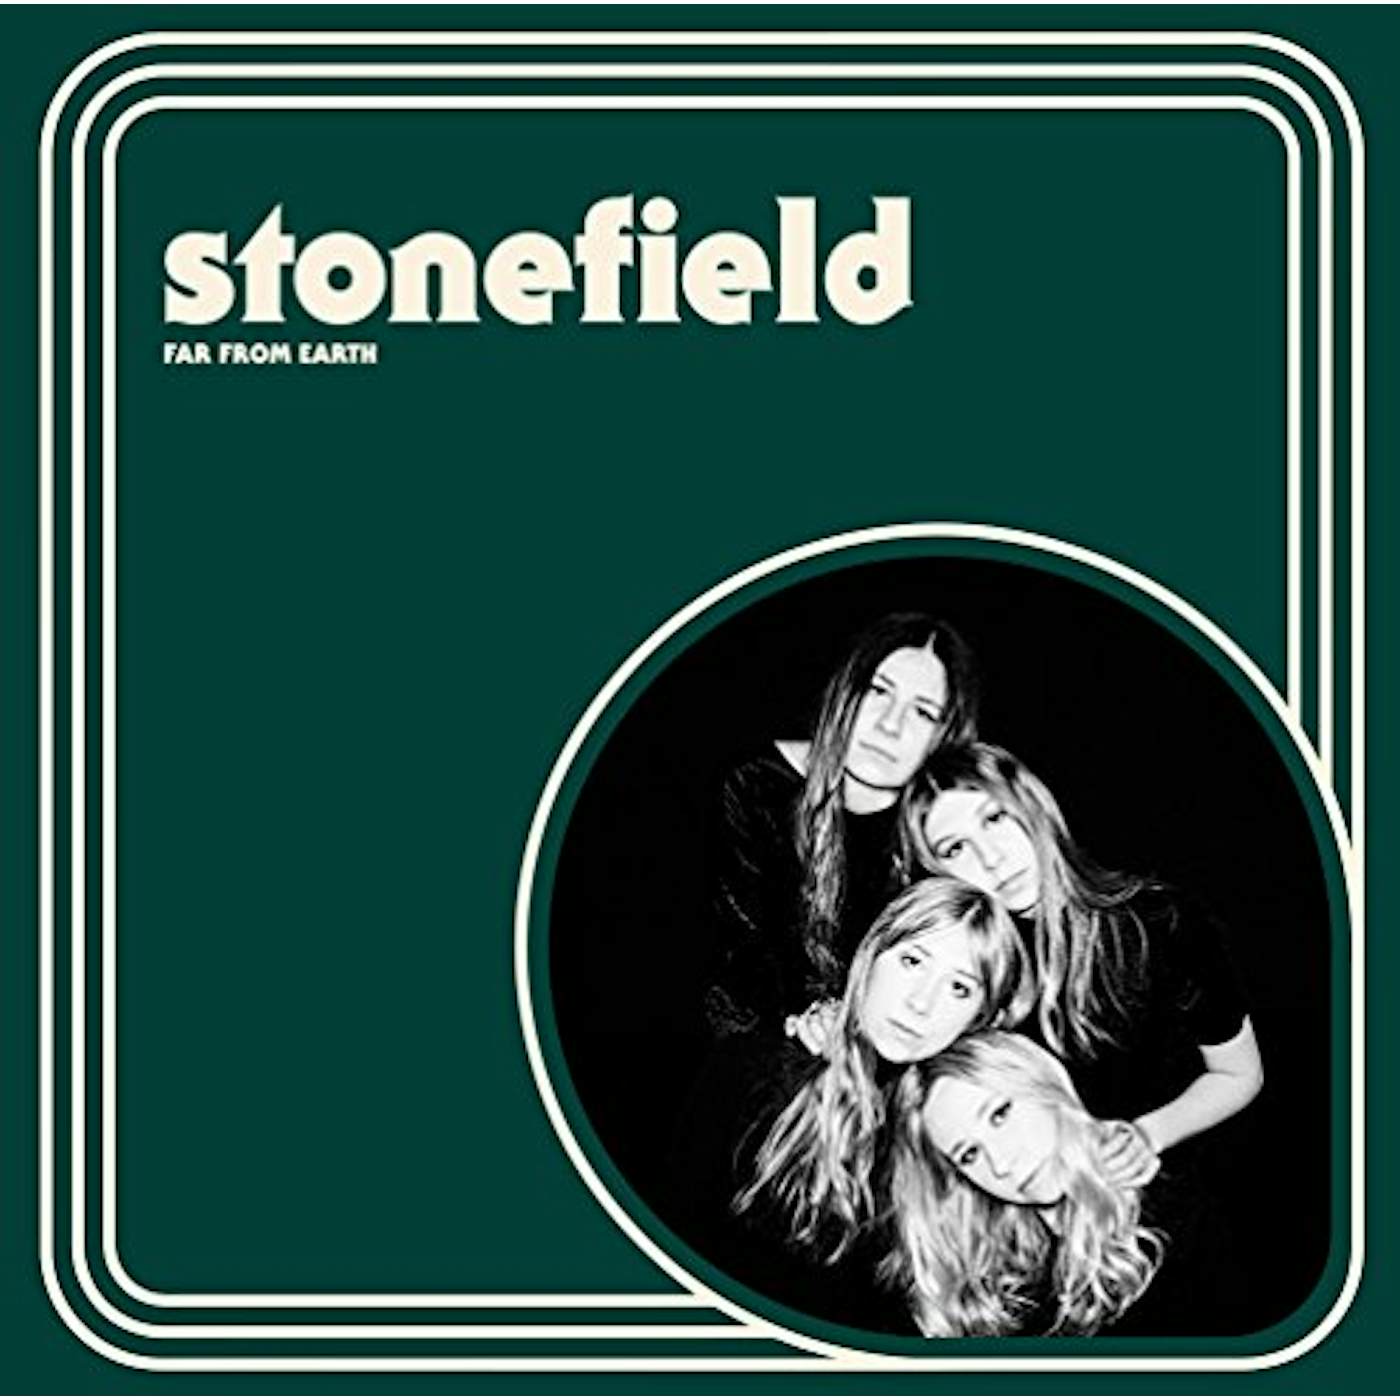 Stonefield FAR FROM EARTH CD